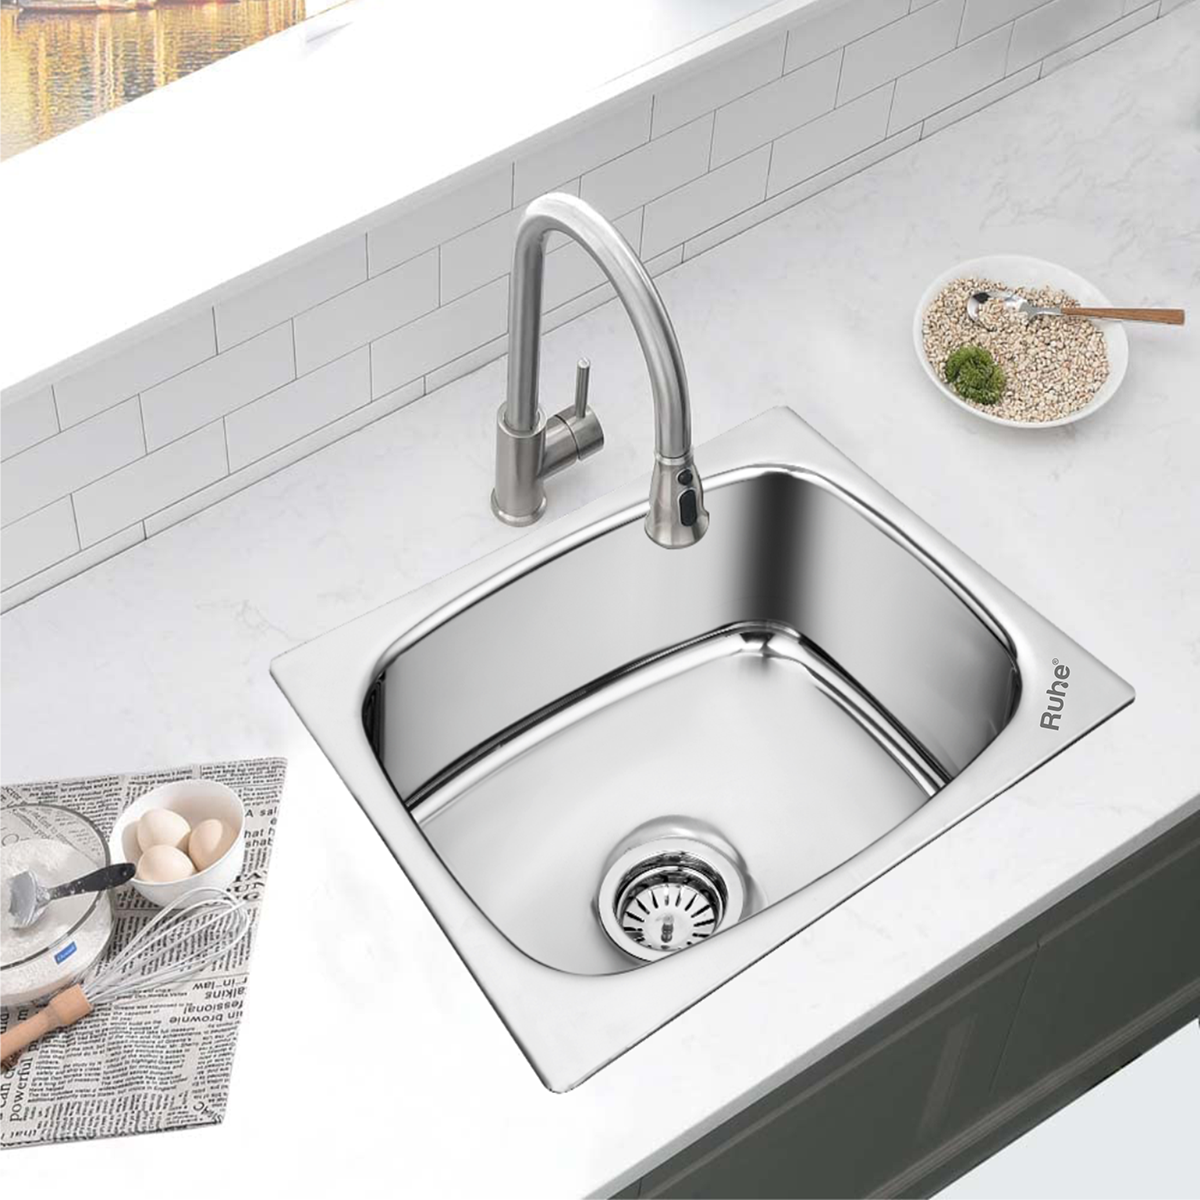 Oval Single Bowl (16 x 18 x 8 inches) Kitchen Sink installed